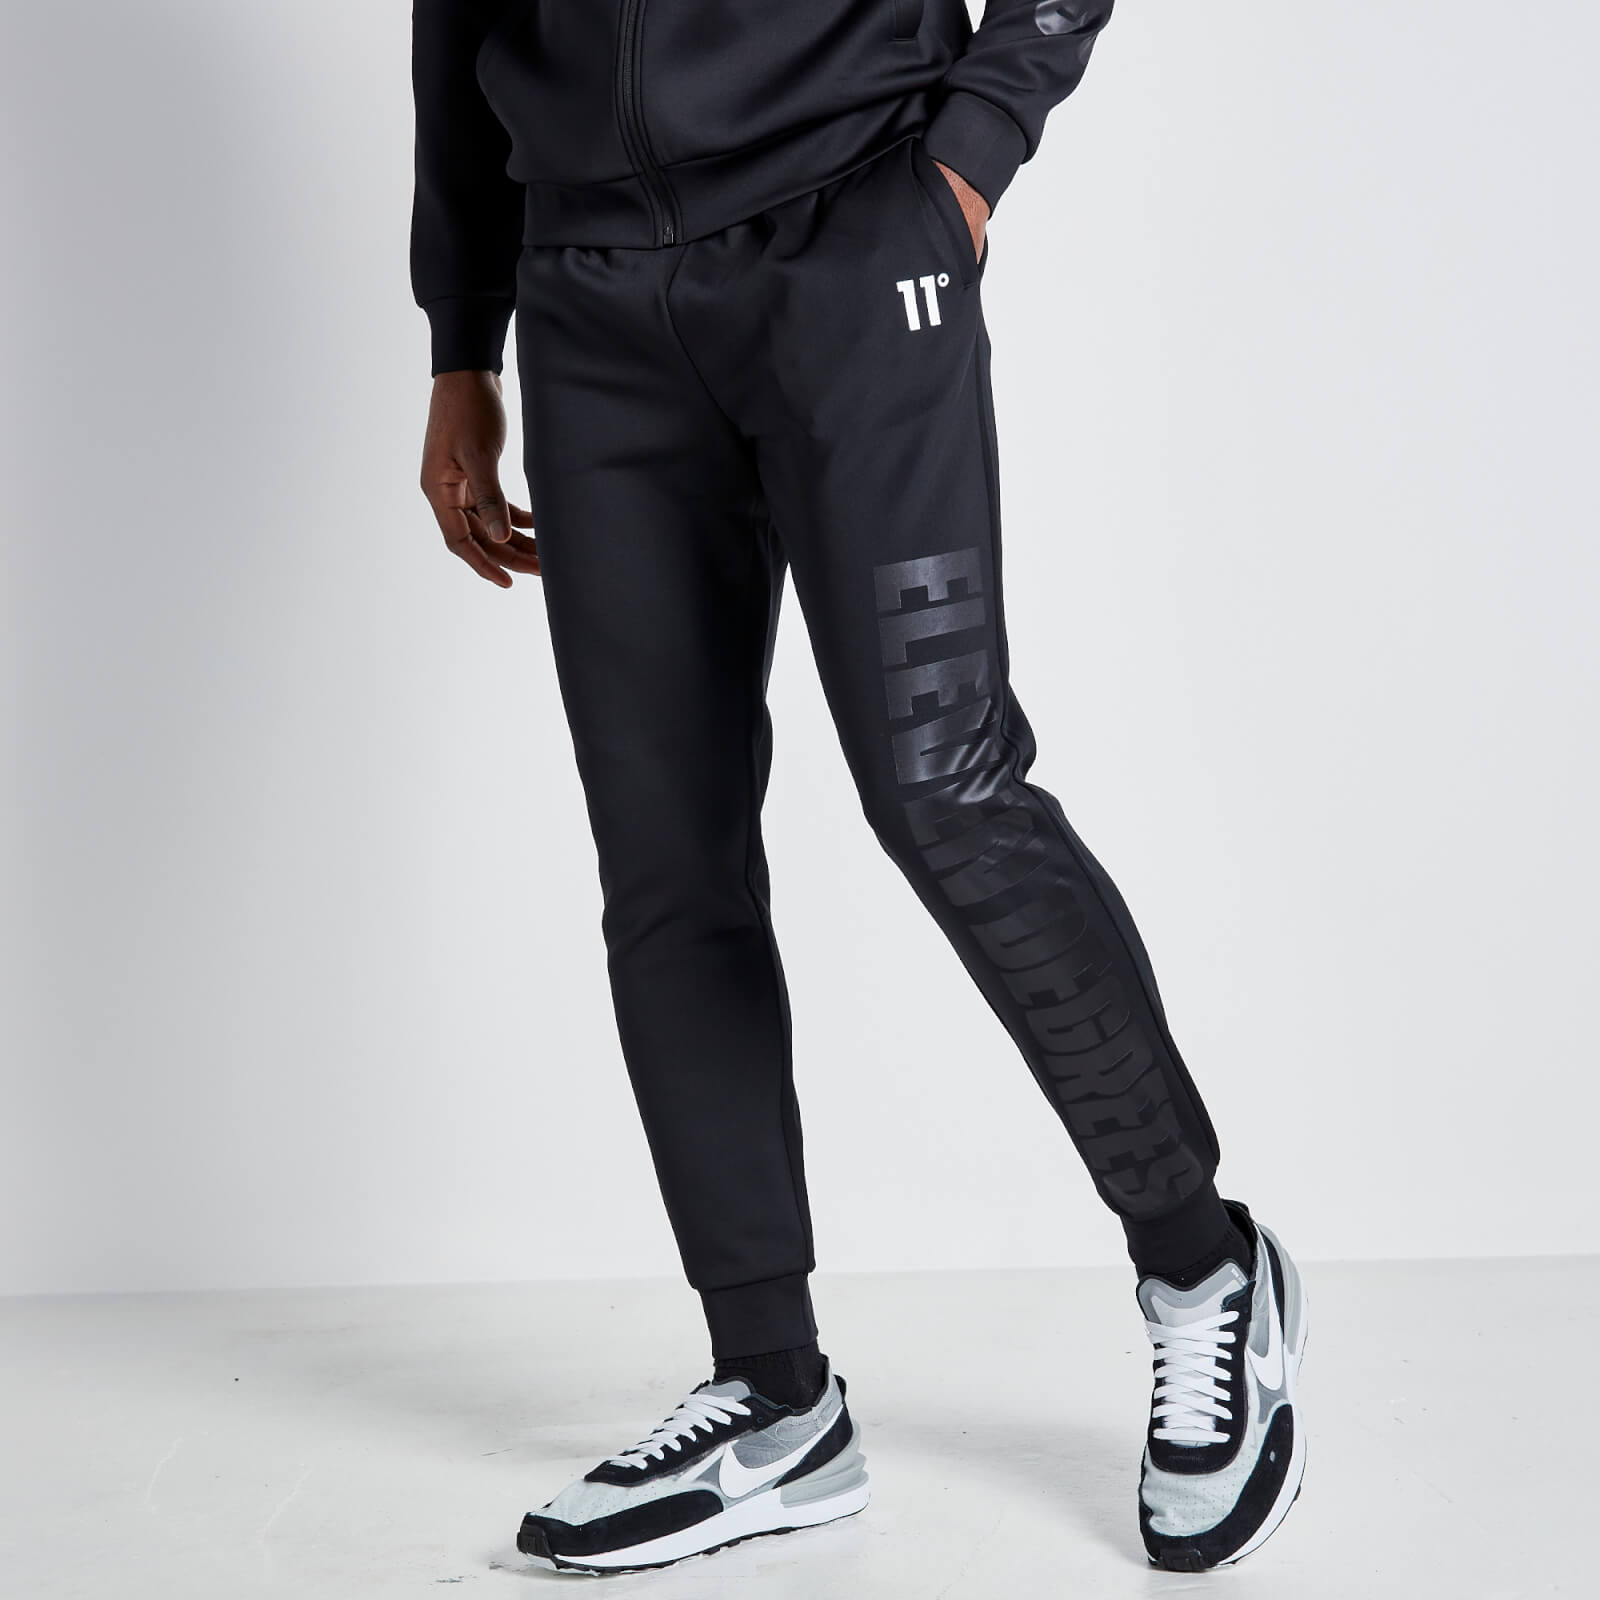 11 Degrees Embossed Print Track Pants - Black - XL from 11 Degrees